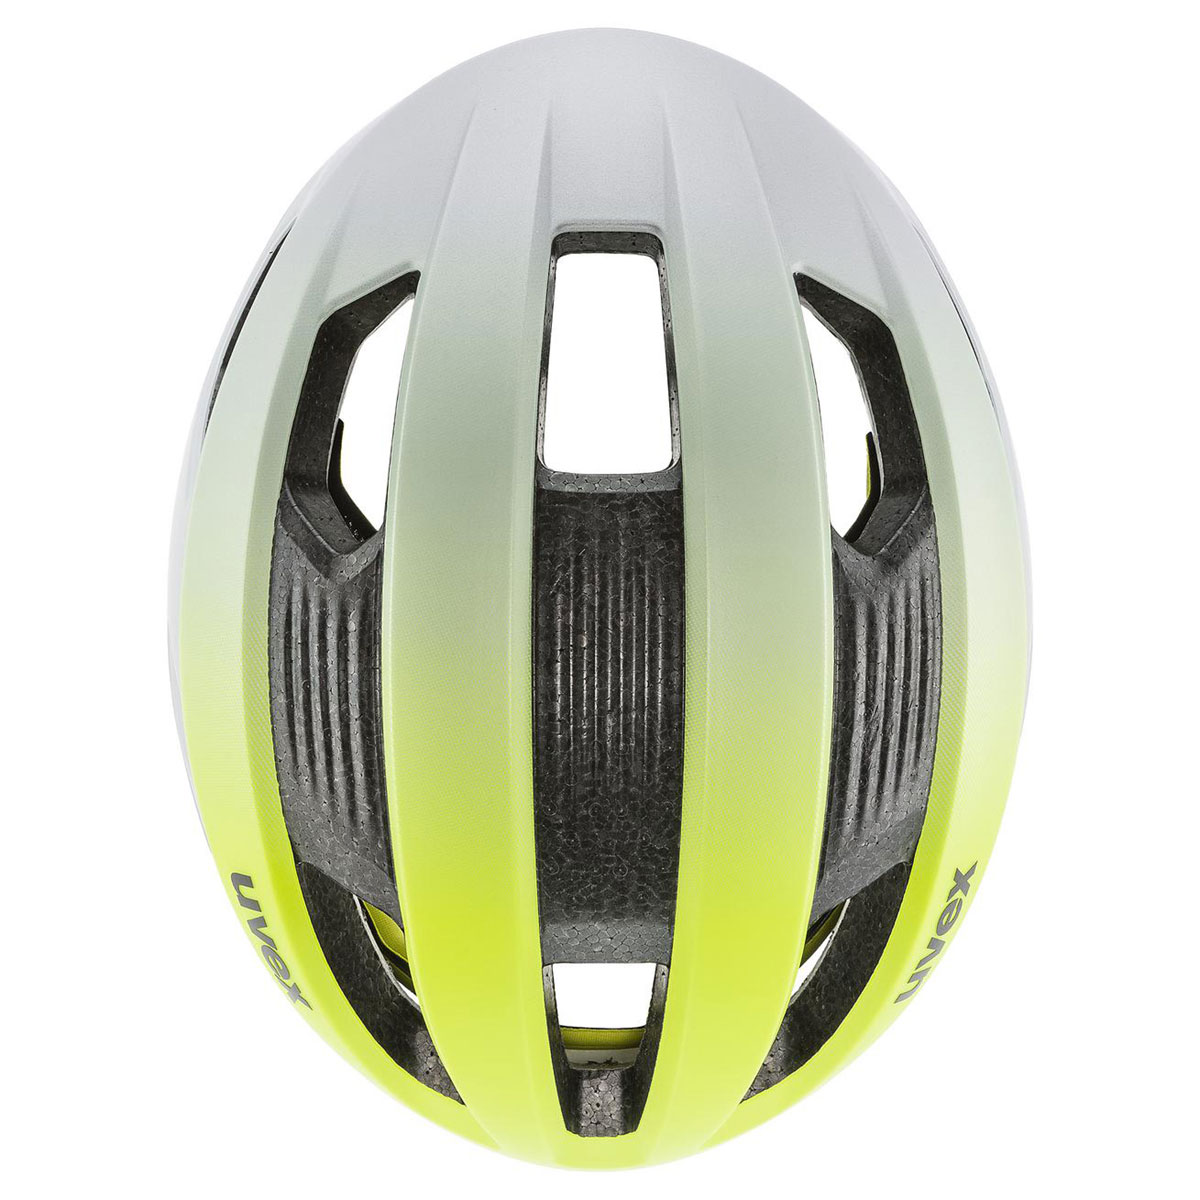 UVEX Rise Cc Tocsen Neon Yellow-silver M (s4100910100)